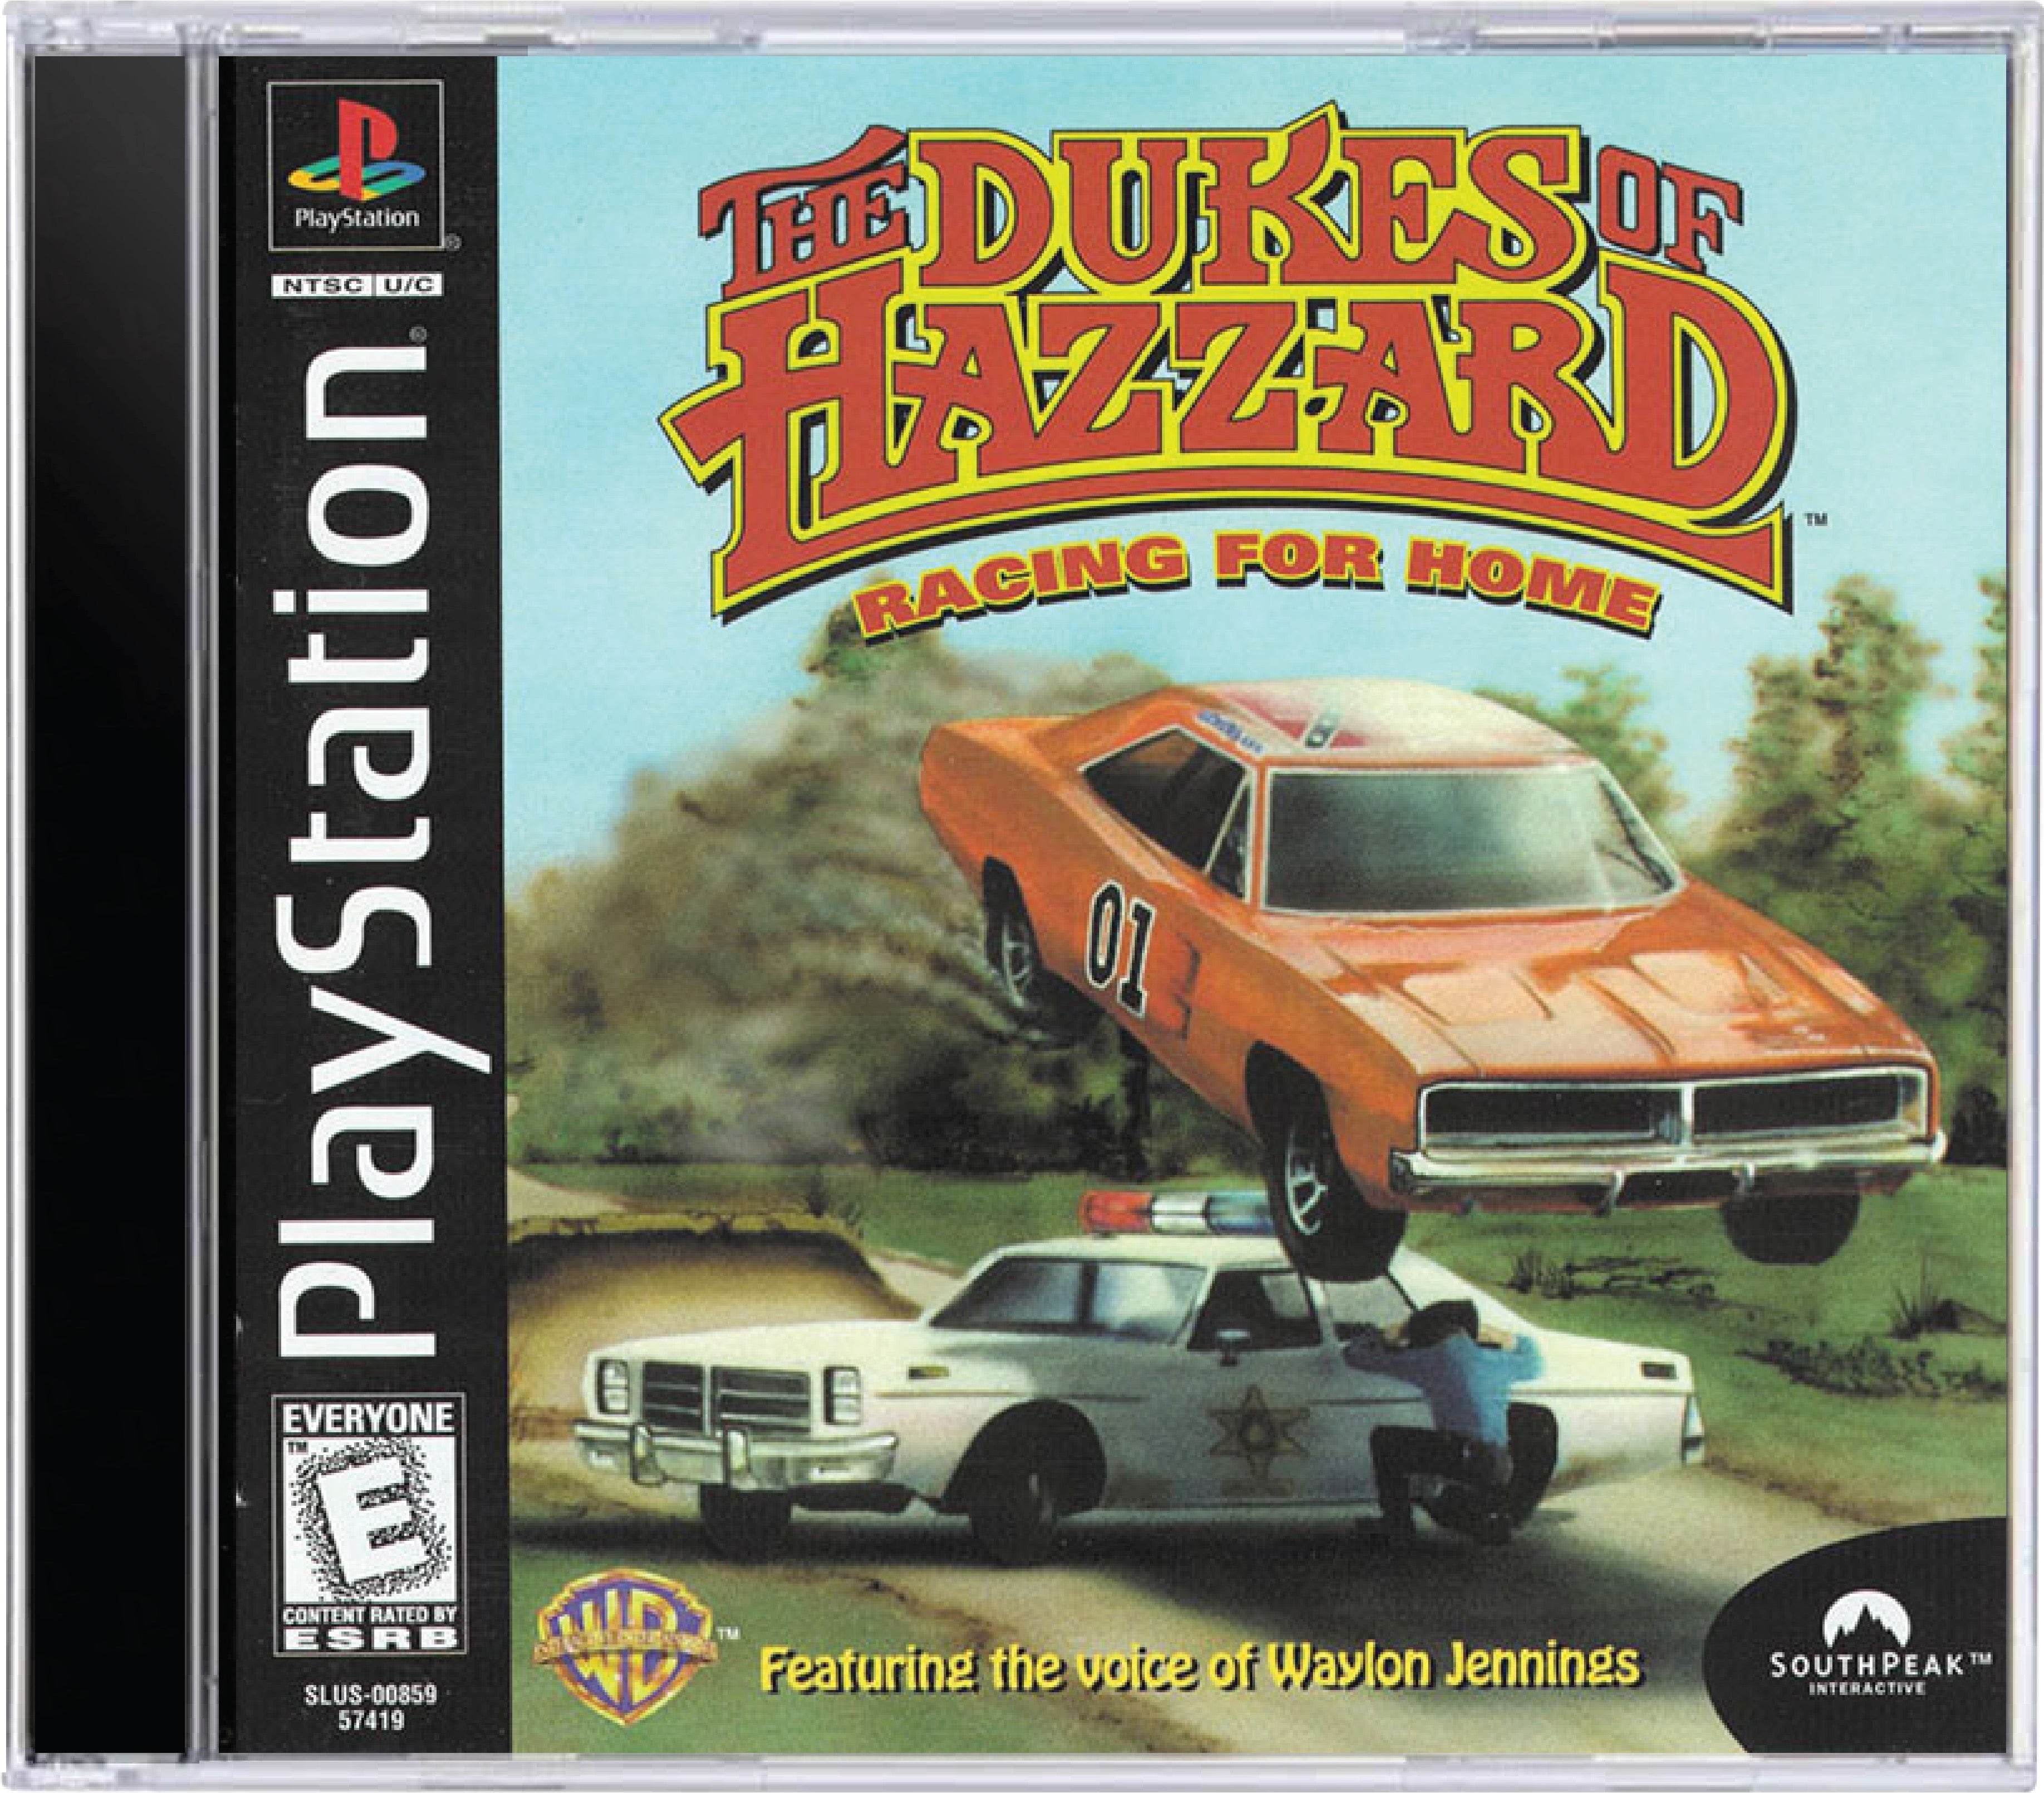 Dukes of Hazzard Racing for Home Cover Art and Product Photo